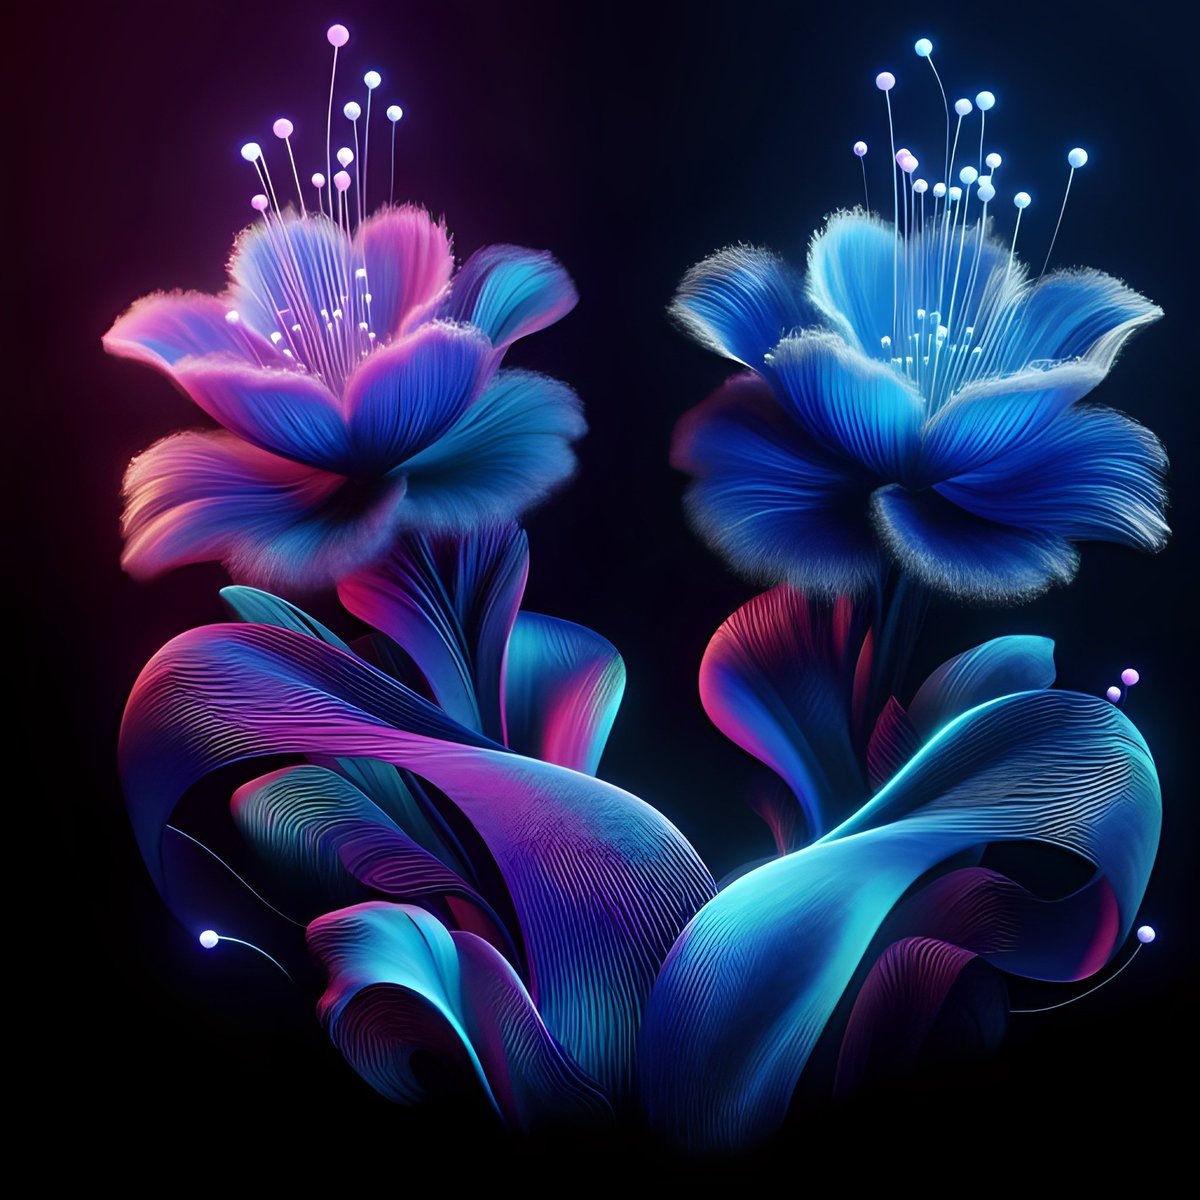 Embracing the mesmerizing glowwave of these ethereal blooms, lighting up the night with their hyperrealistic marine beauty. 🌌🌸 #NatureMagic #GlowingFlowers 🆀🆃 ♻ Your 𝗚𝗹𝗼𝘄𝗶𝗻𝗴 𝗙𝗹𝗼𝘄𝗲𝗿𝘀 Art. #MakeArtSmiles 🤜🤛🏼 ☞ 𝗔𝗟𝗧. Flowers 𝗔𝗹𝗯𝘂𝗺 #Prompt 𝗦𝗵𝗮𝗿𝗲.